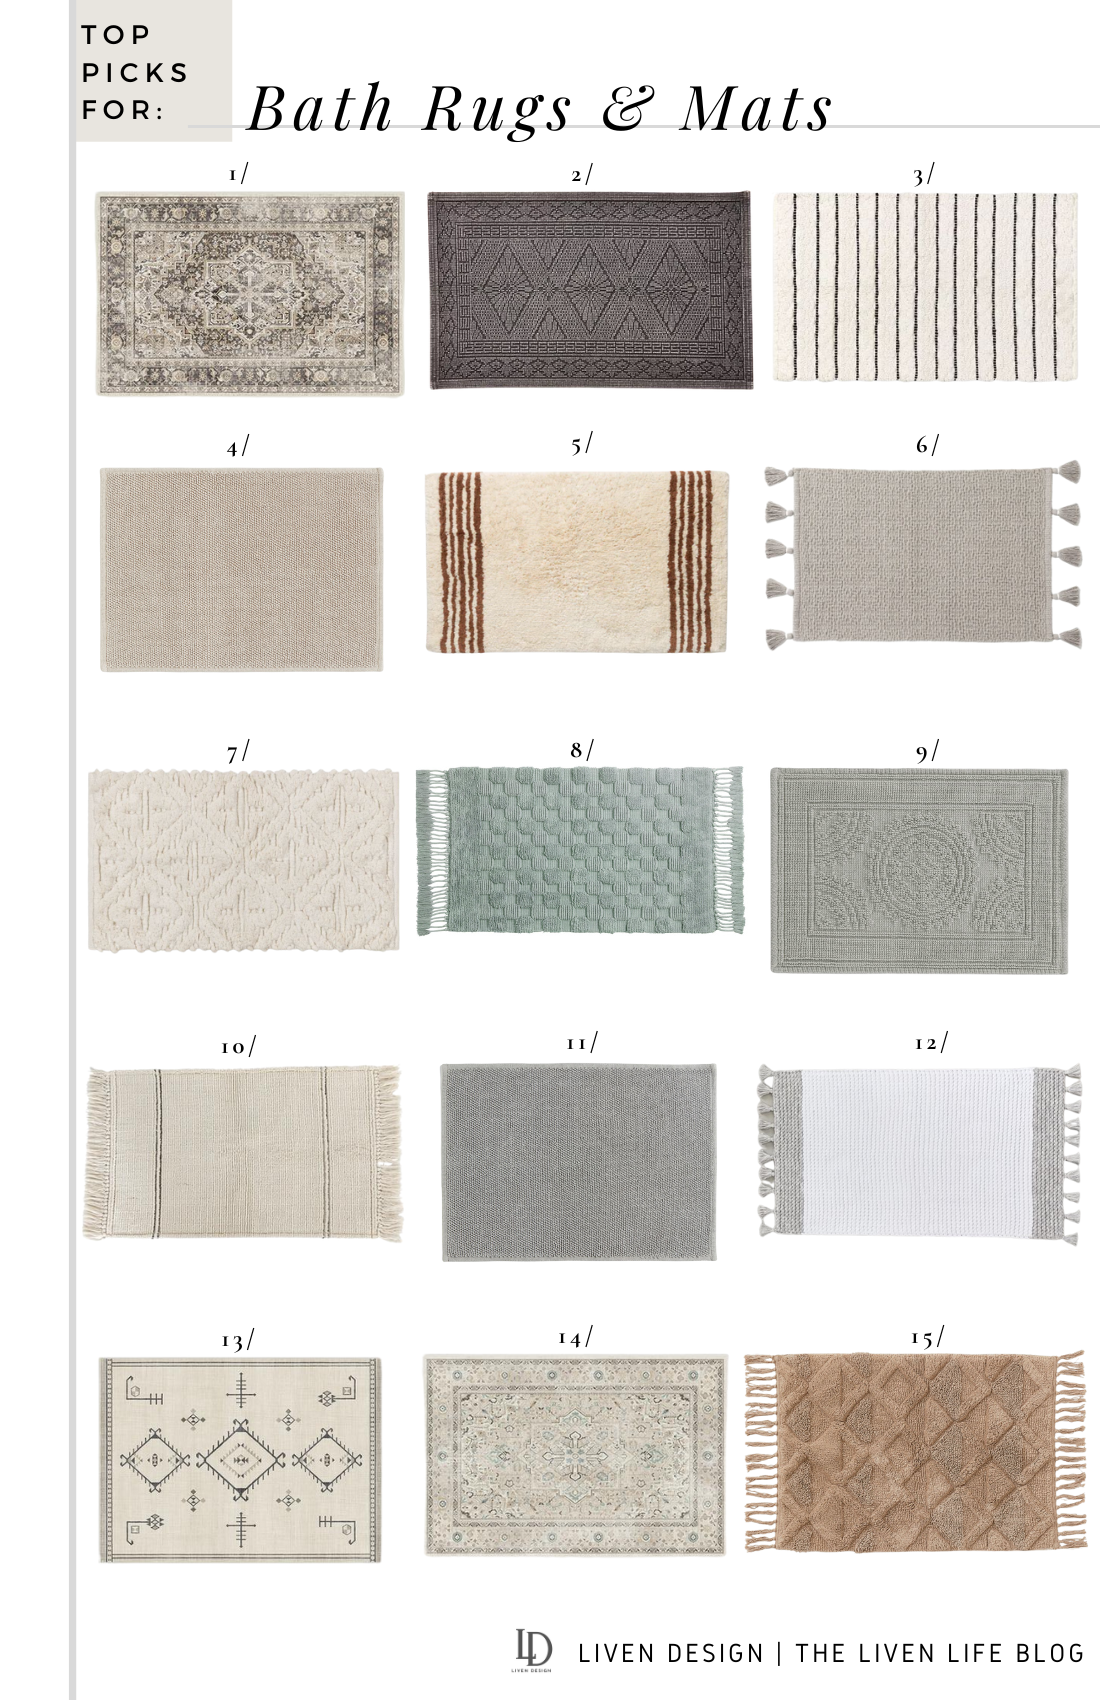 The Ultimate Guide to Bath Rugs and Mats: Top 10 Products to Keep